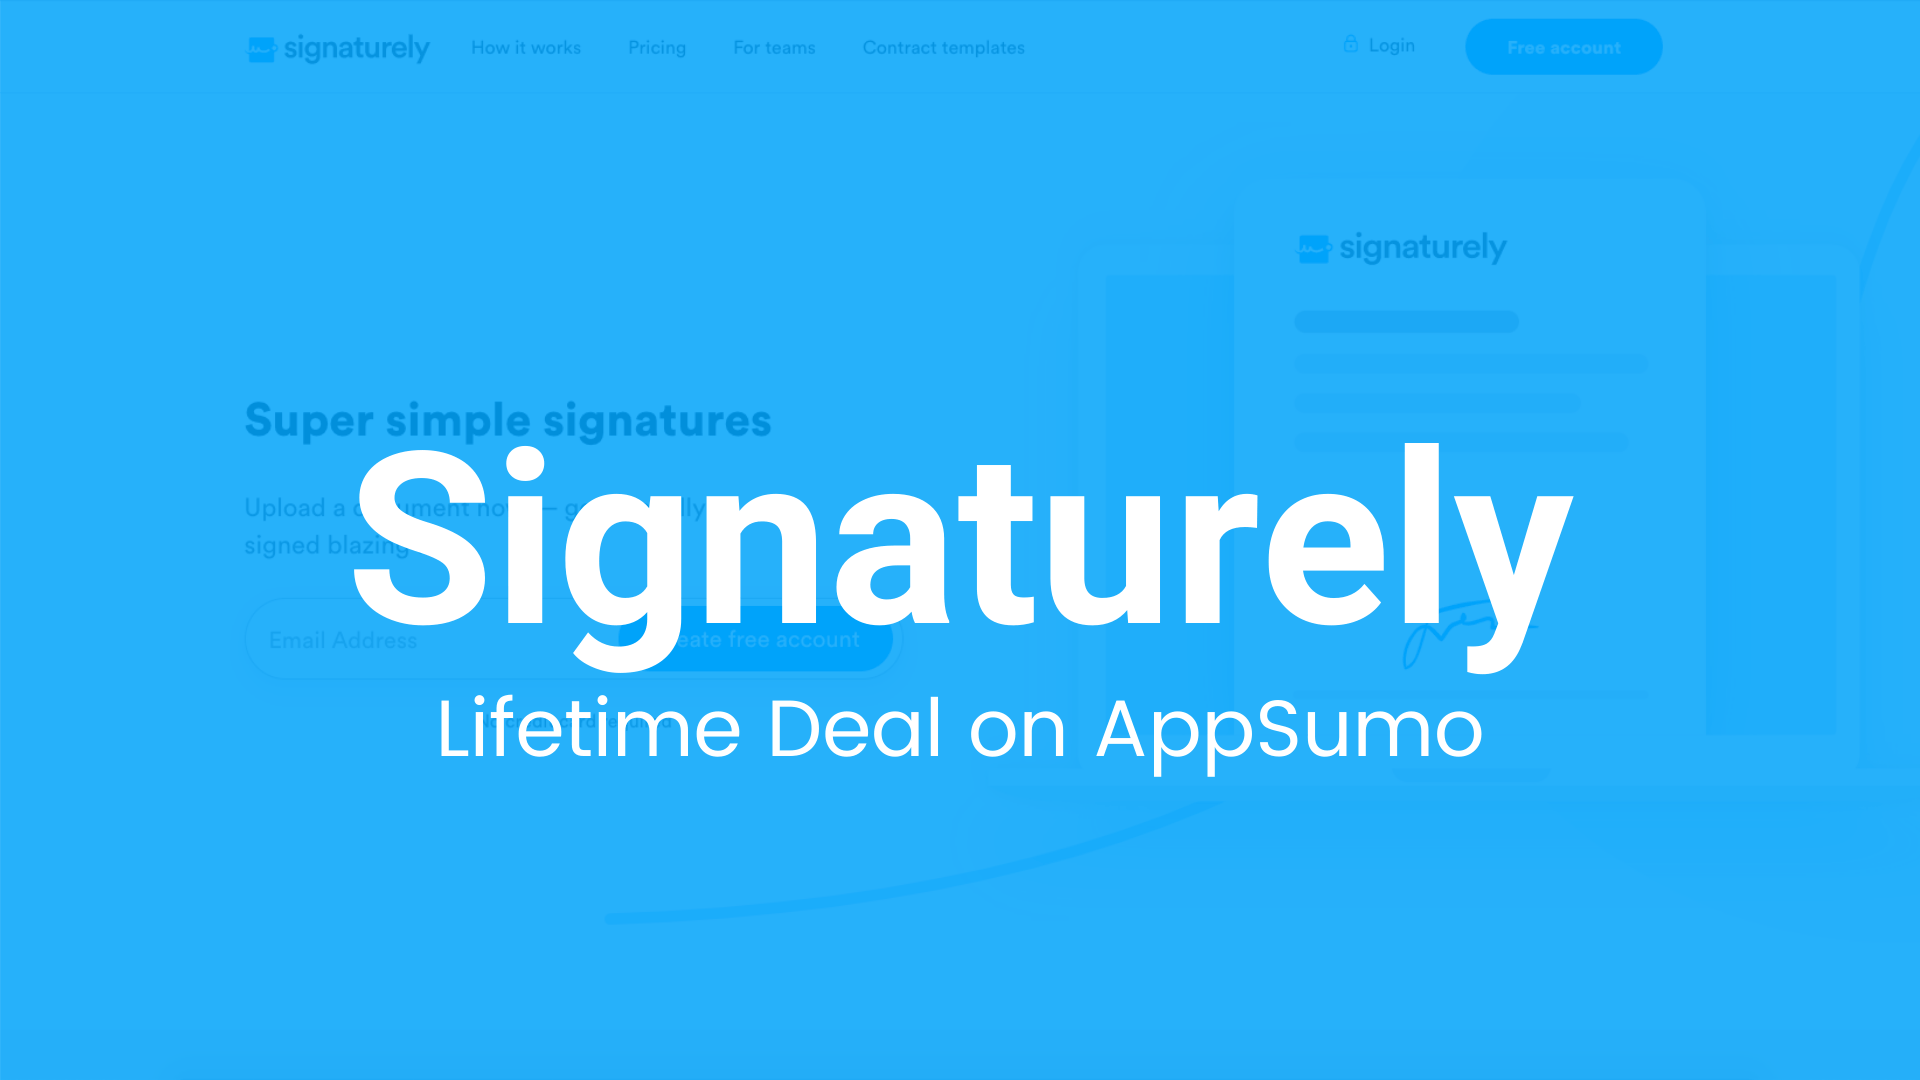 Signaturely: Send, Sign, and Store Your Documents